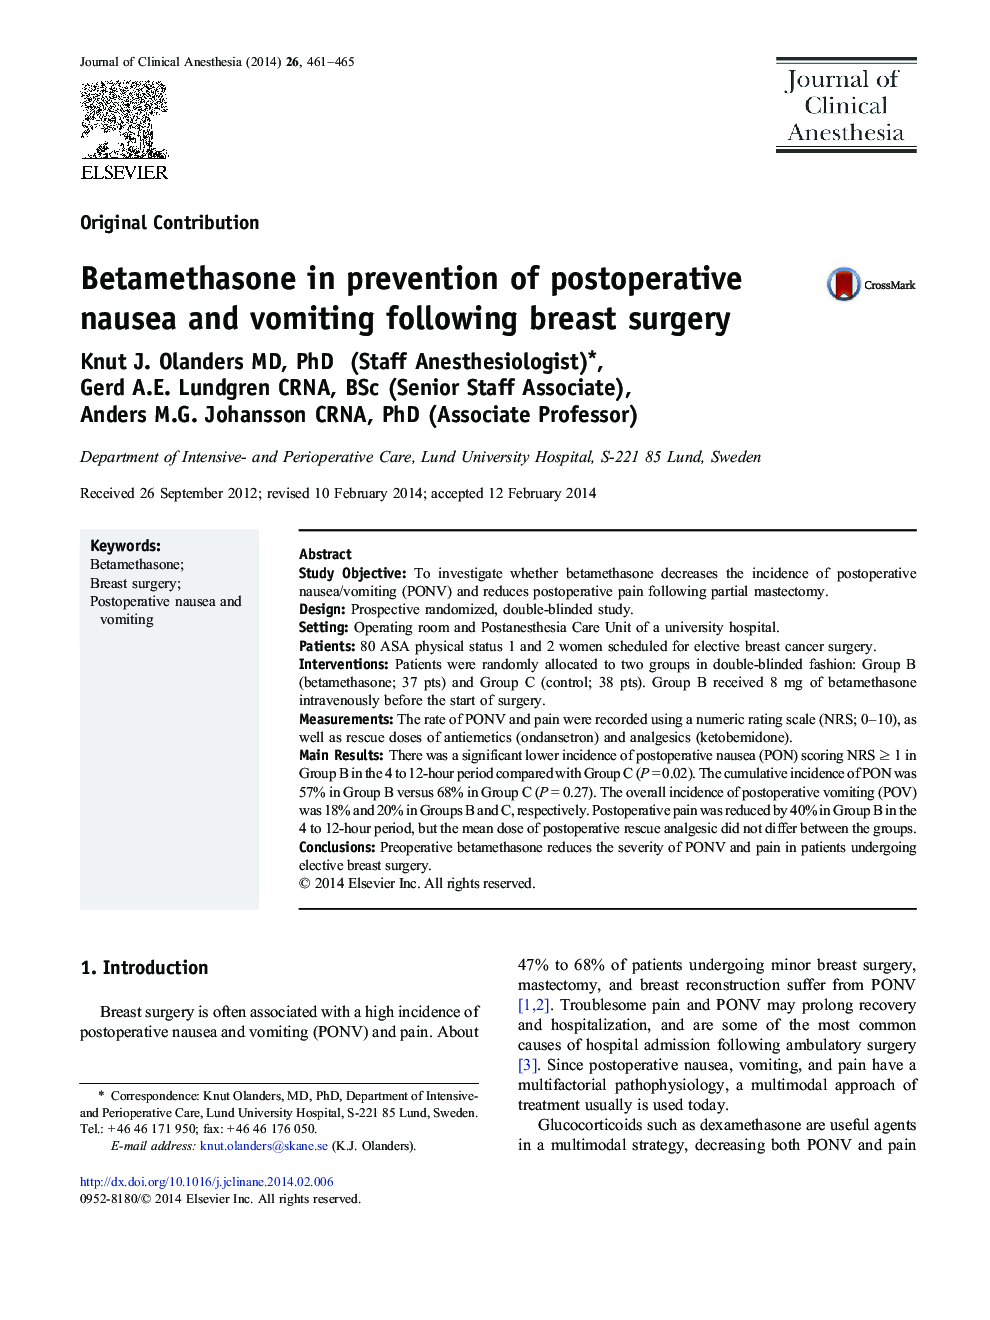 Betamethasone in prevention of postoperative nausea and vomiting following breast surgery